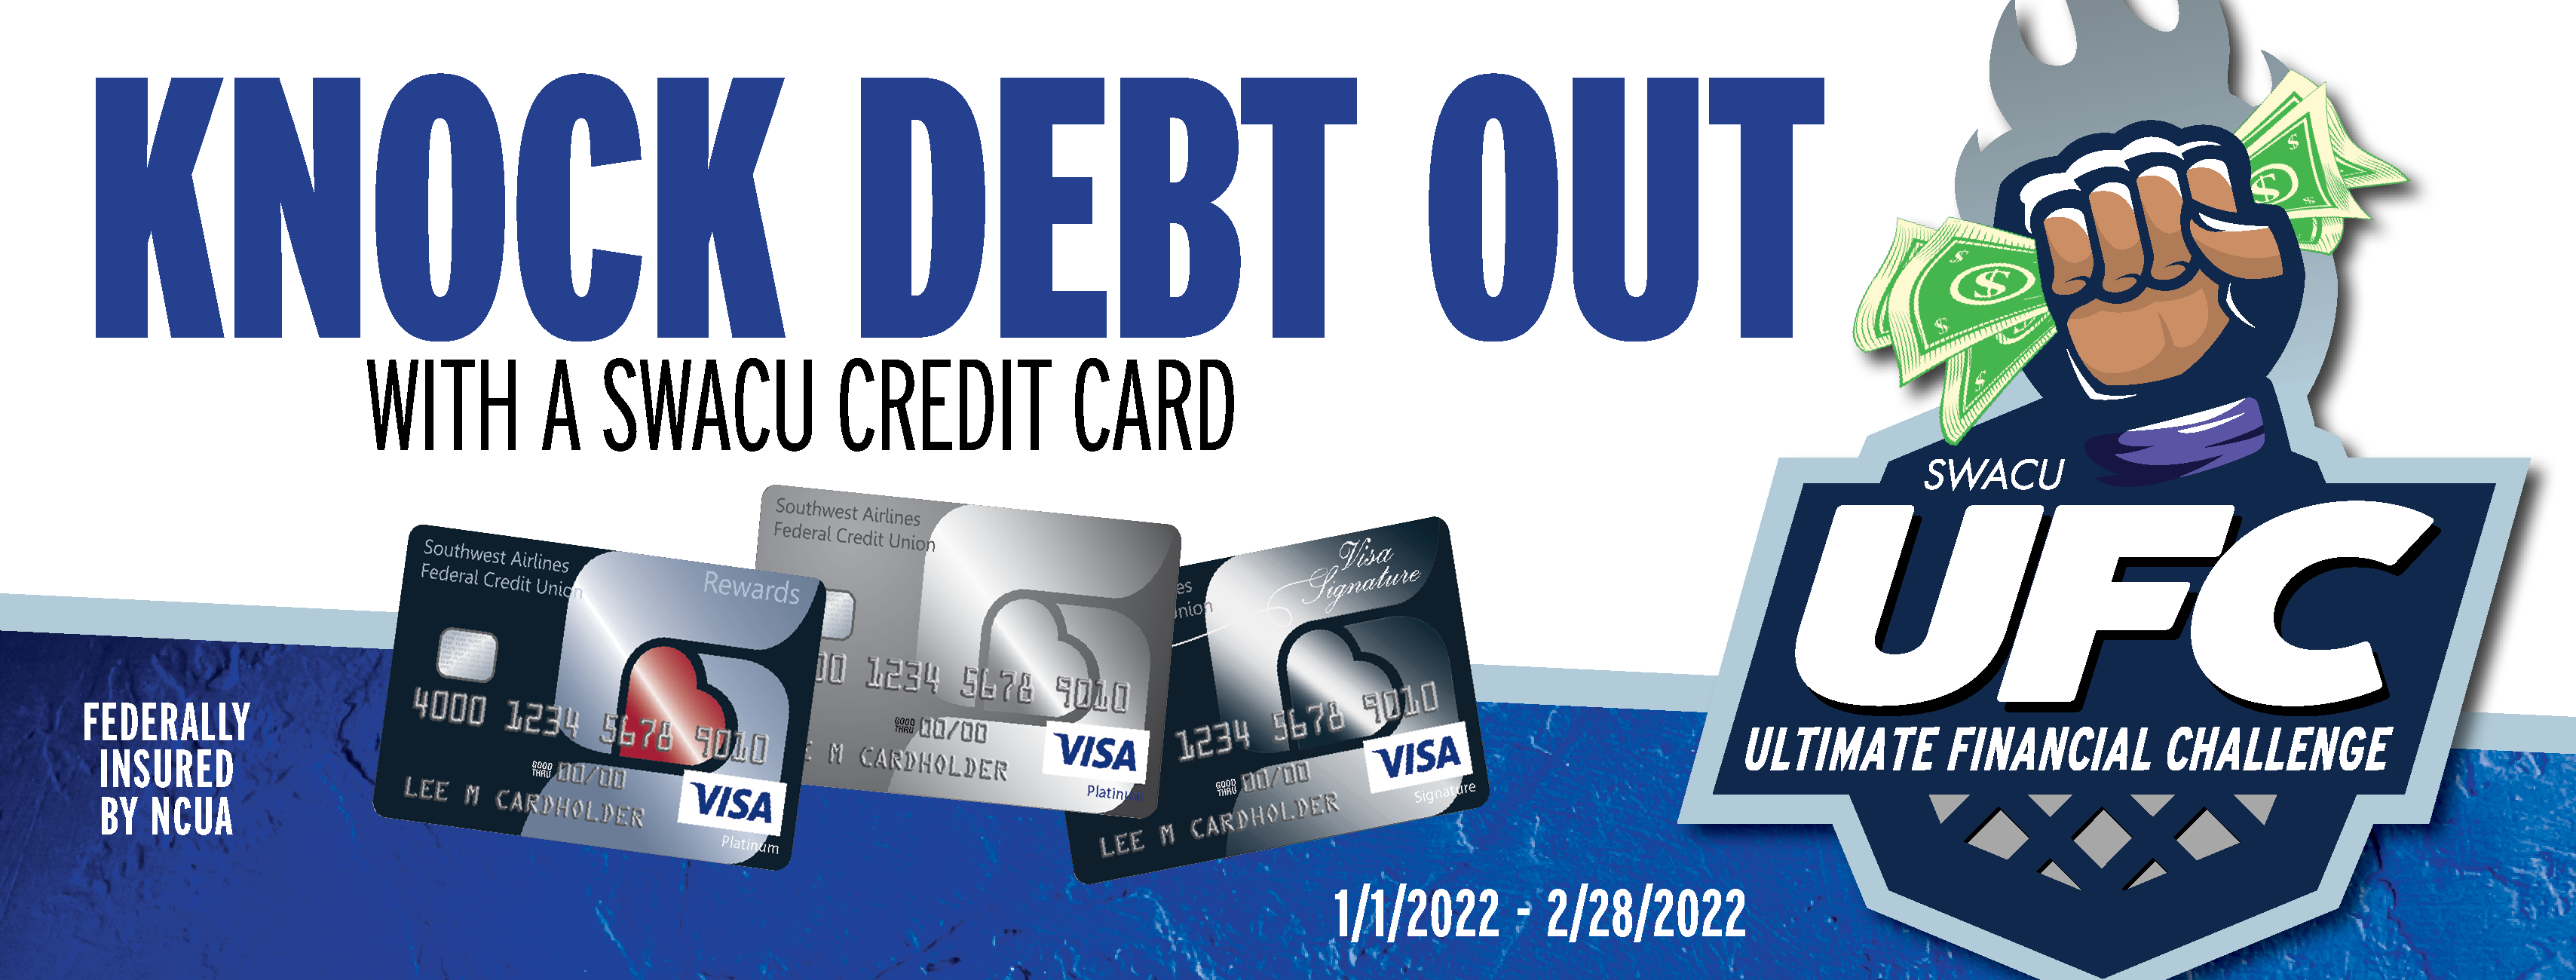 Ultimate Financial Challenge Credit Cards